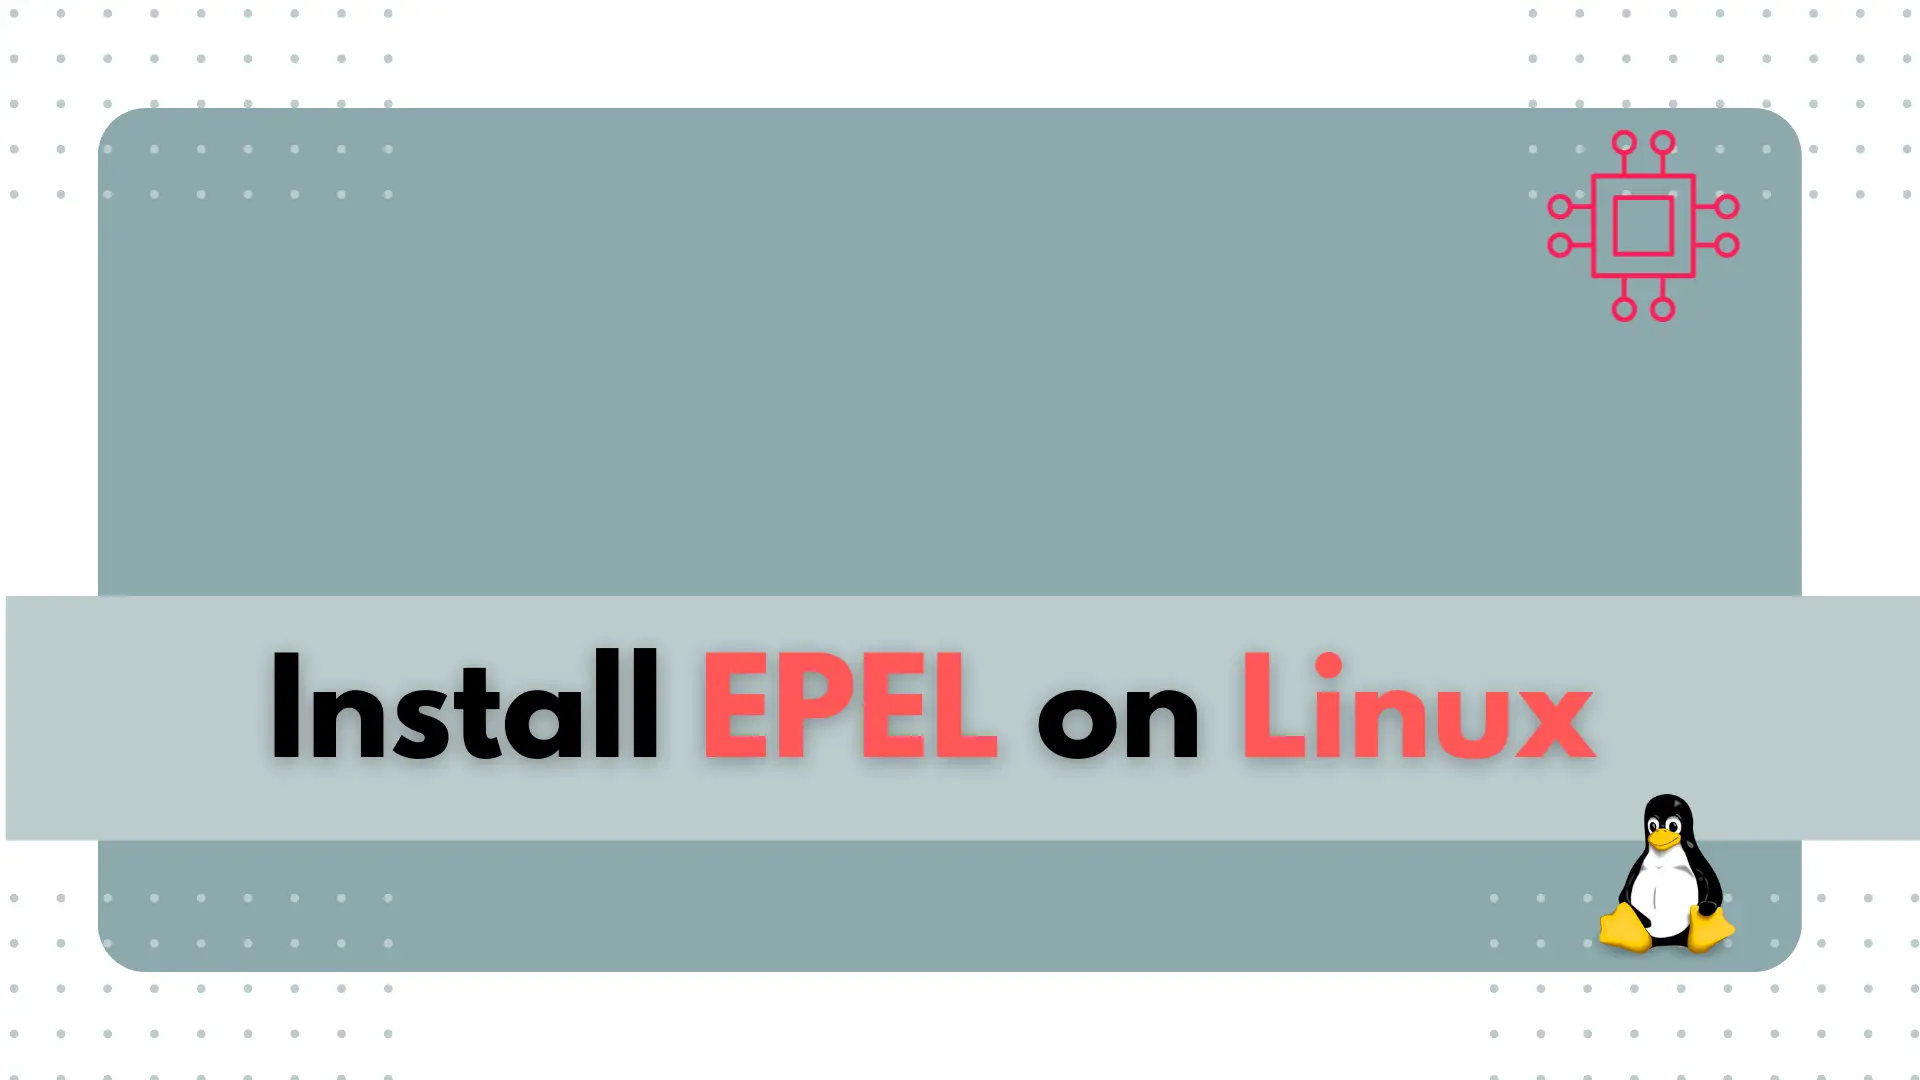 Install EPEL on Linux